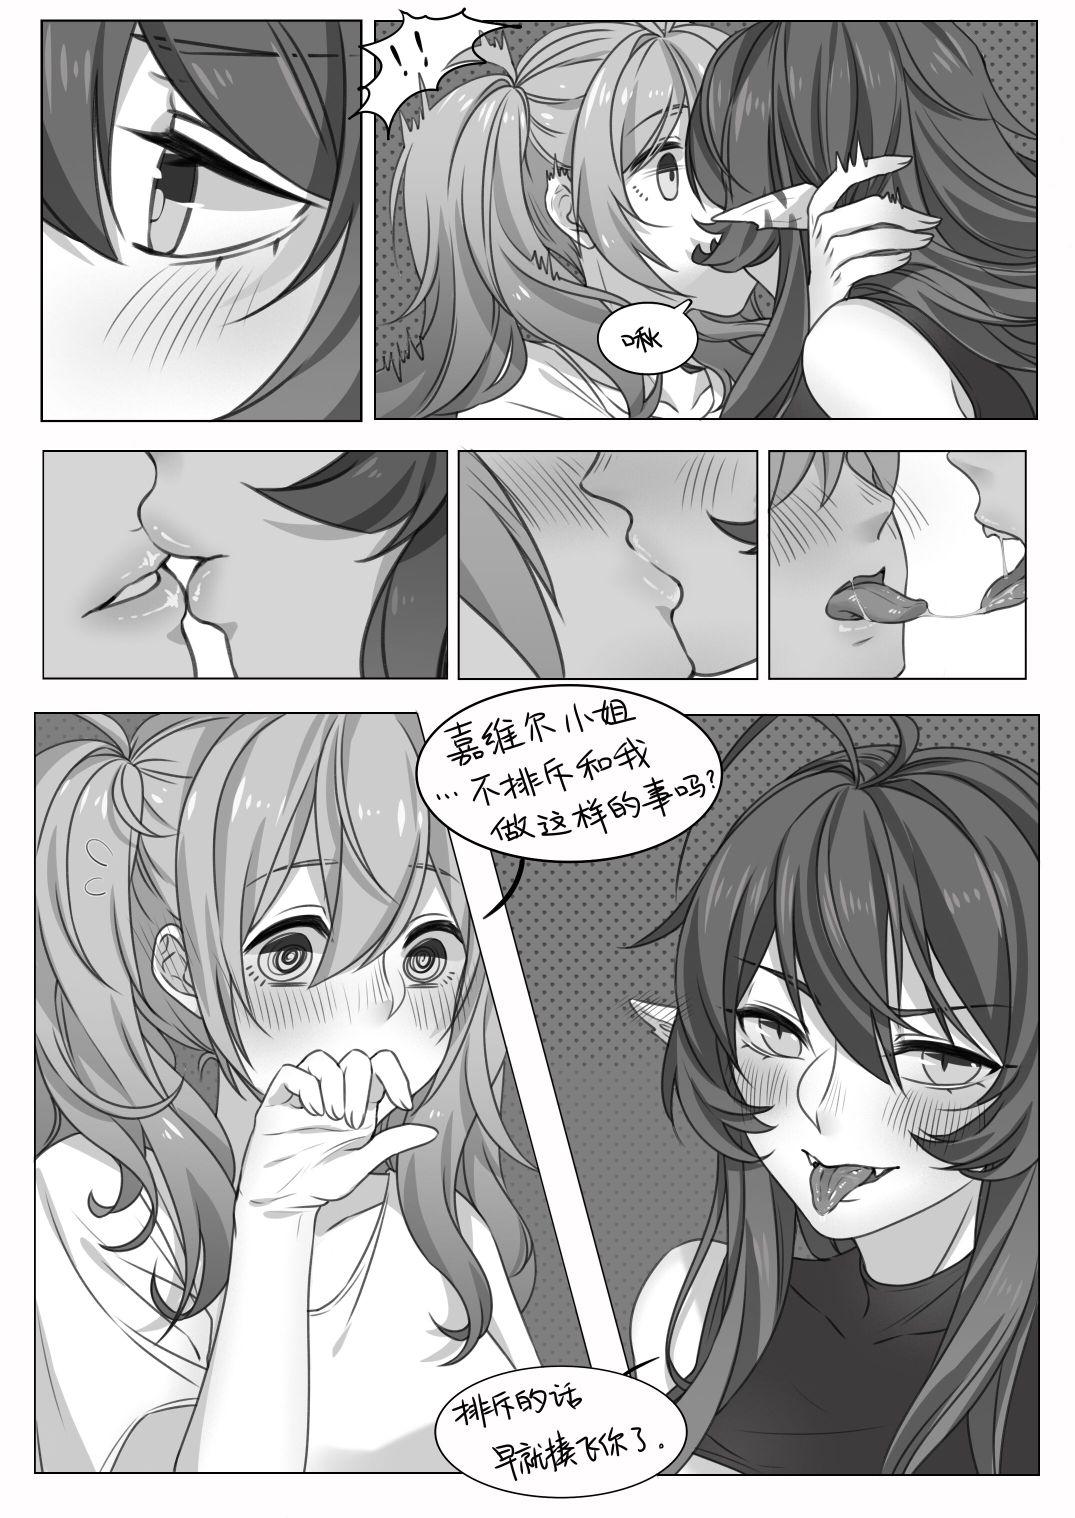 Party 向满信赖的嘉维尔小姐请求打炮会被拒绝吗？ - Arknights Best Blowjob Ever - Page 7